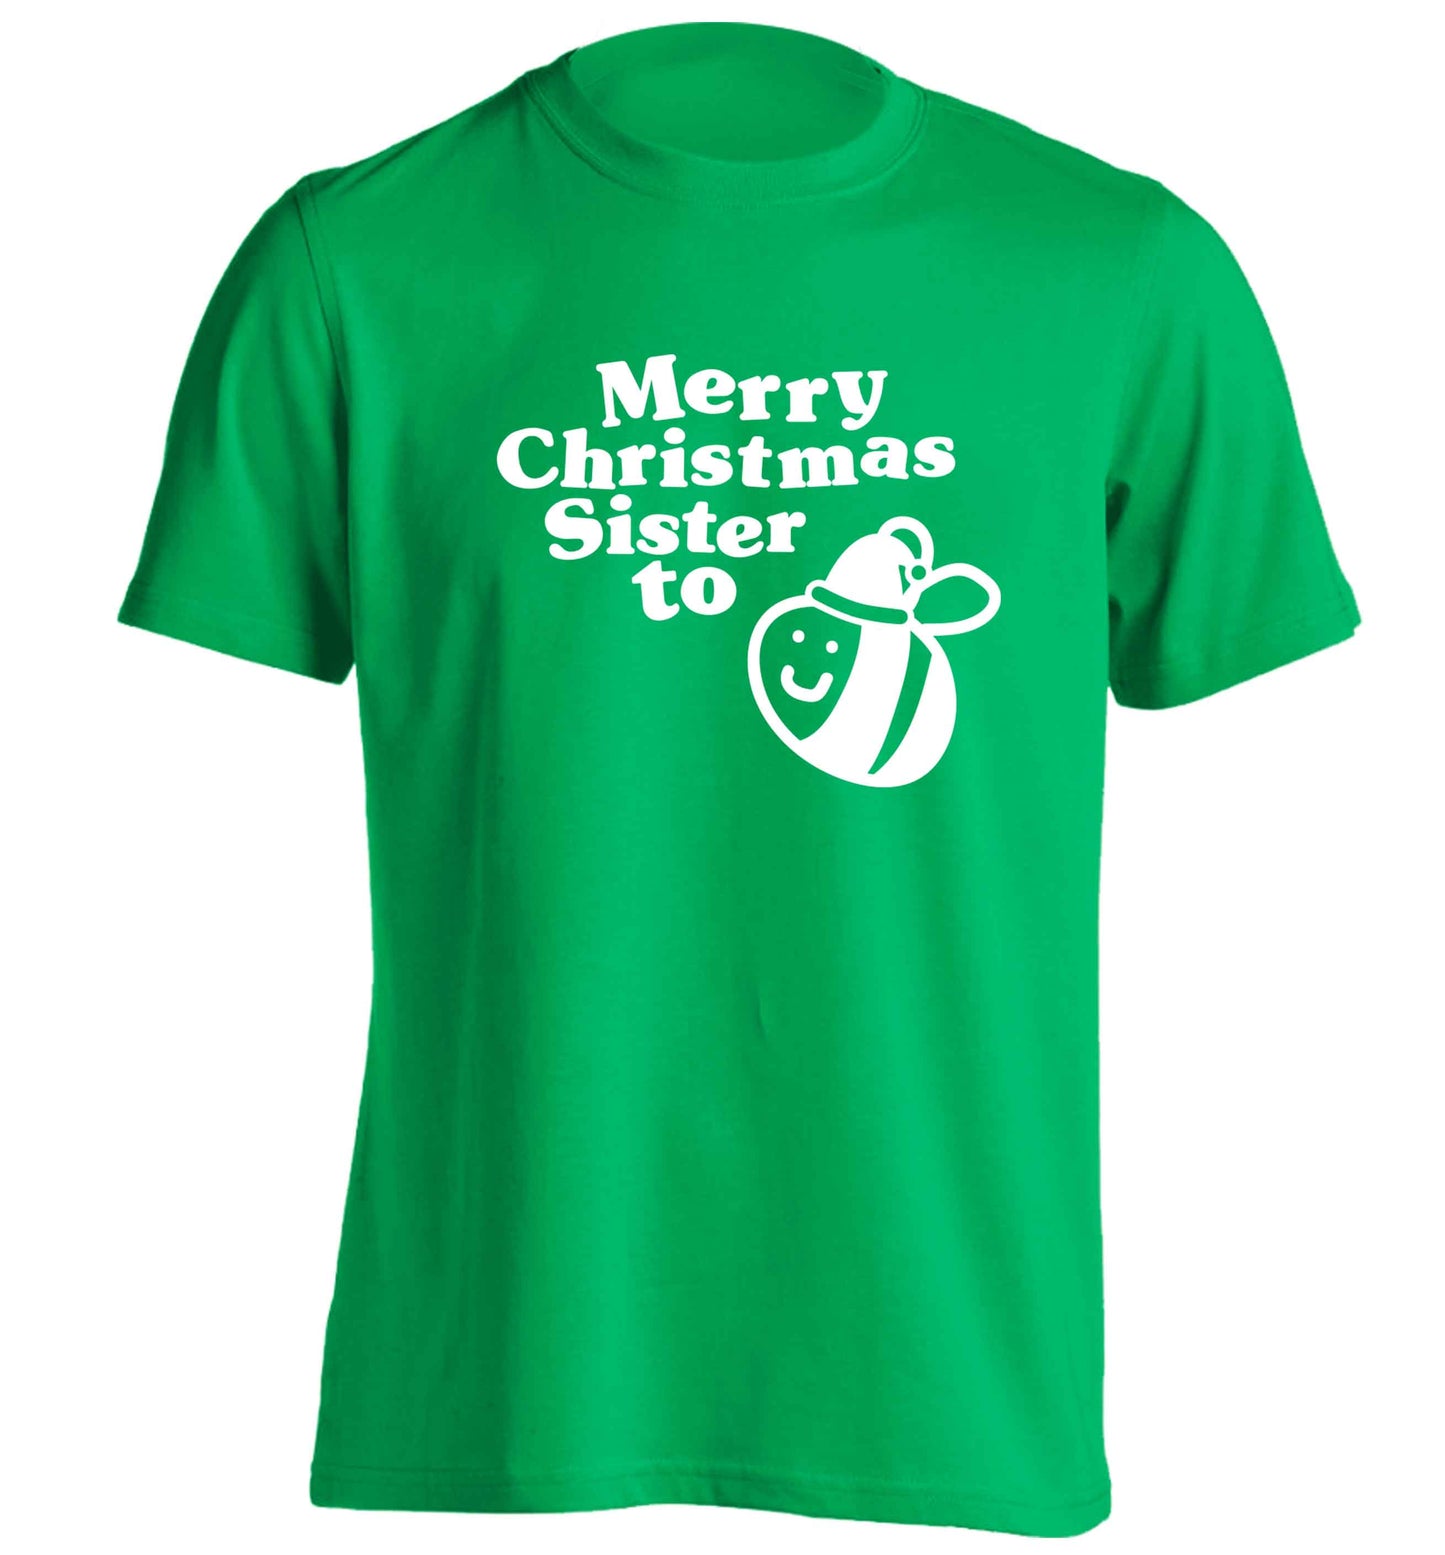 Merry Christmas sister to be adults unisex green Tshirt 2XL